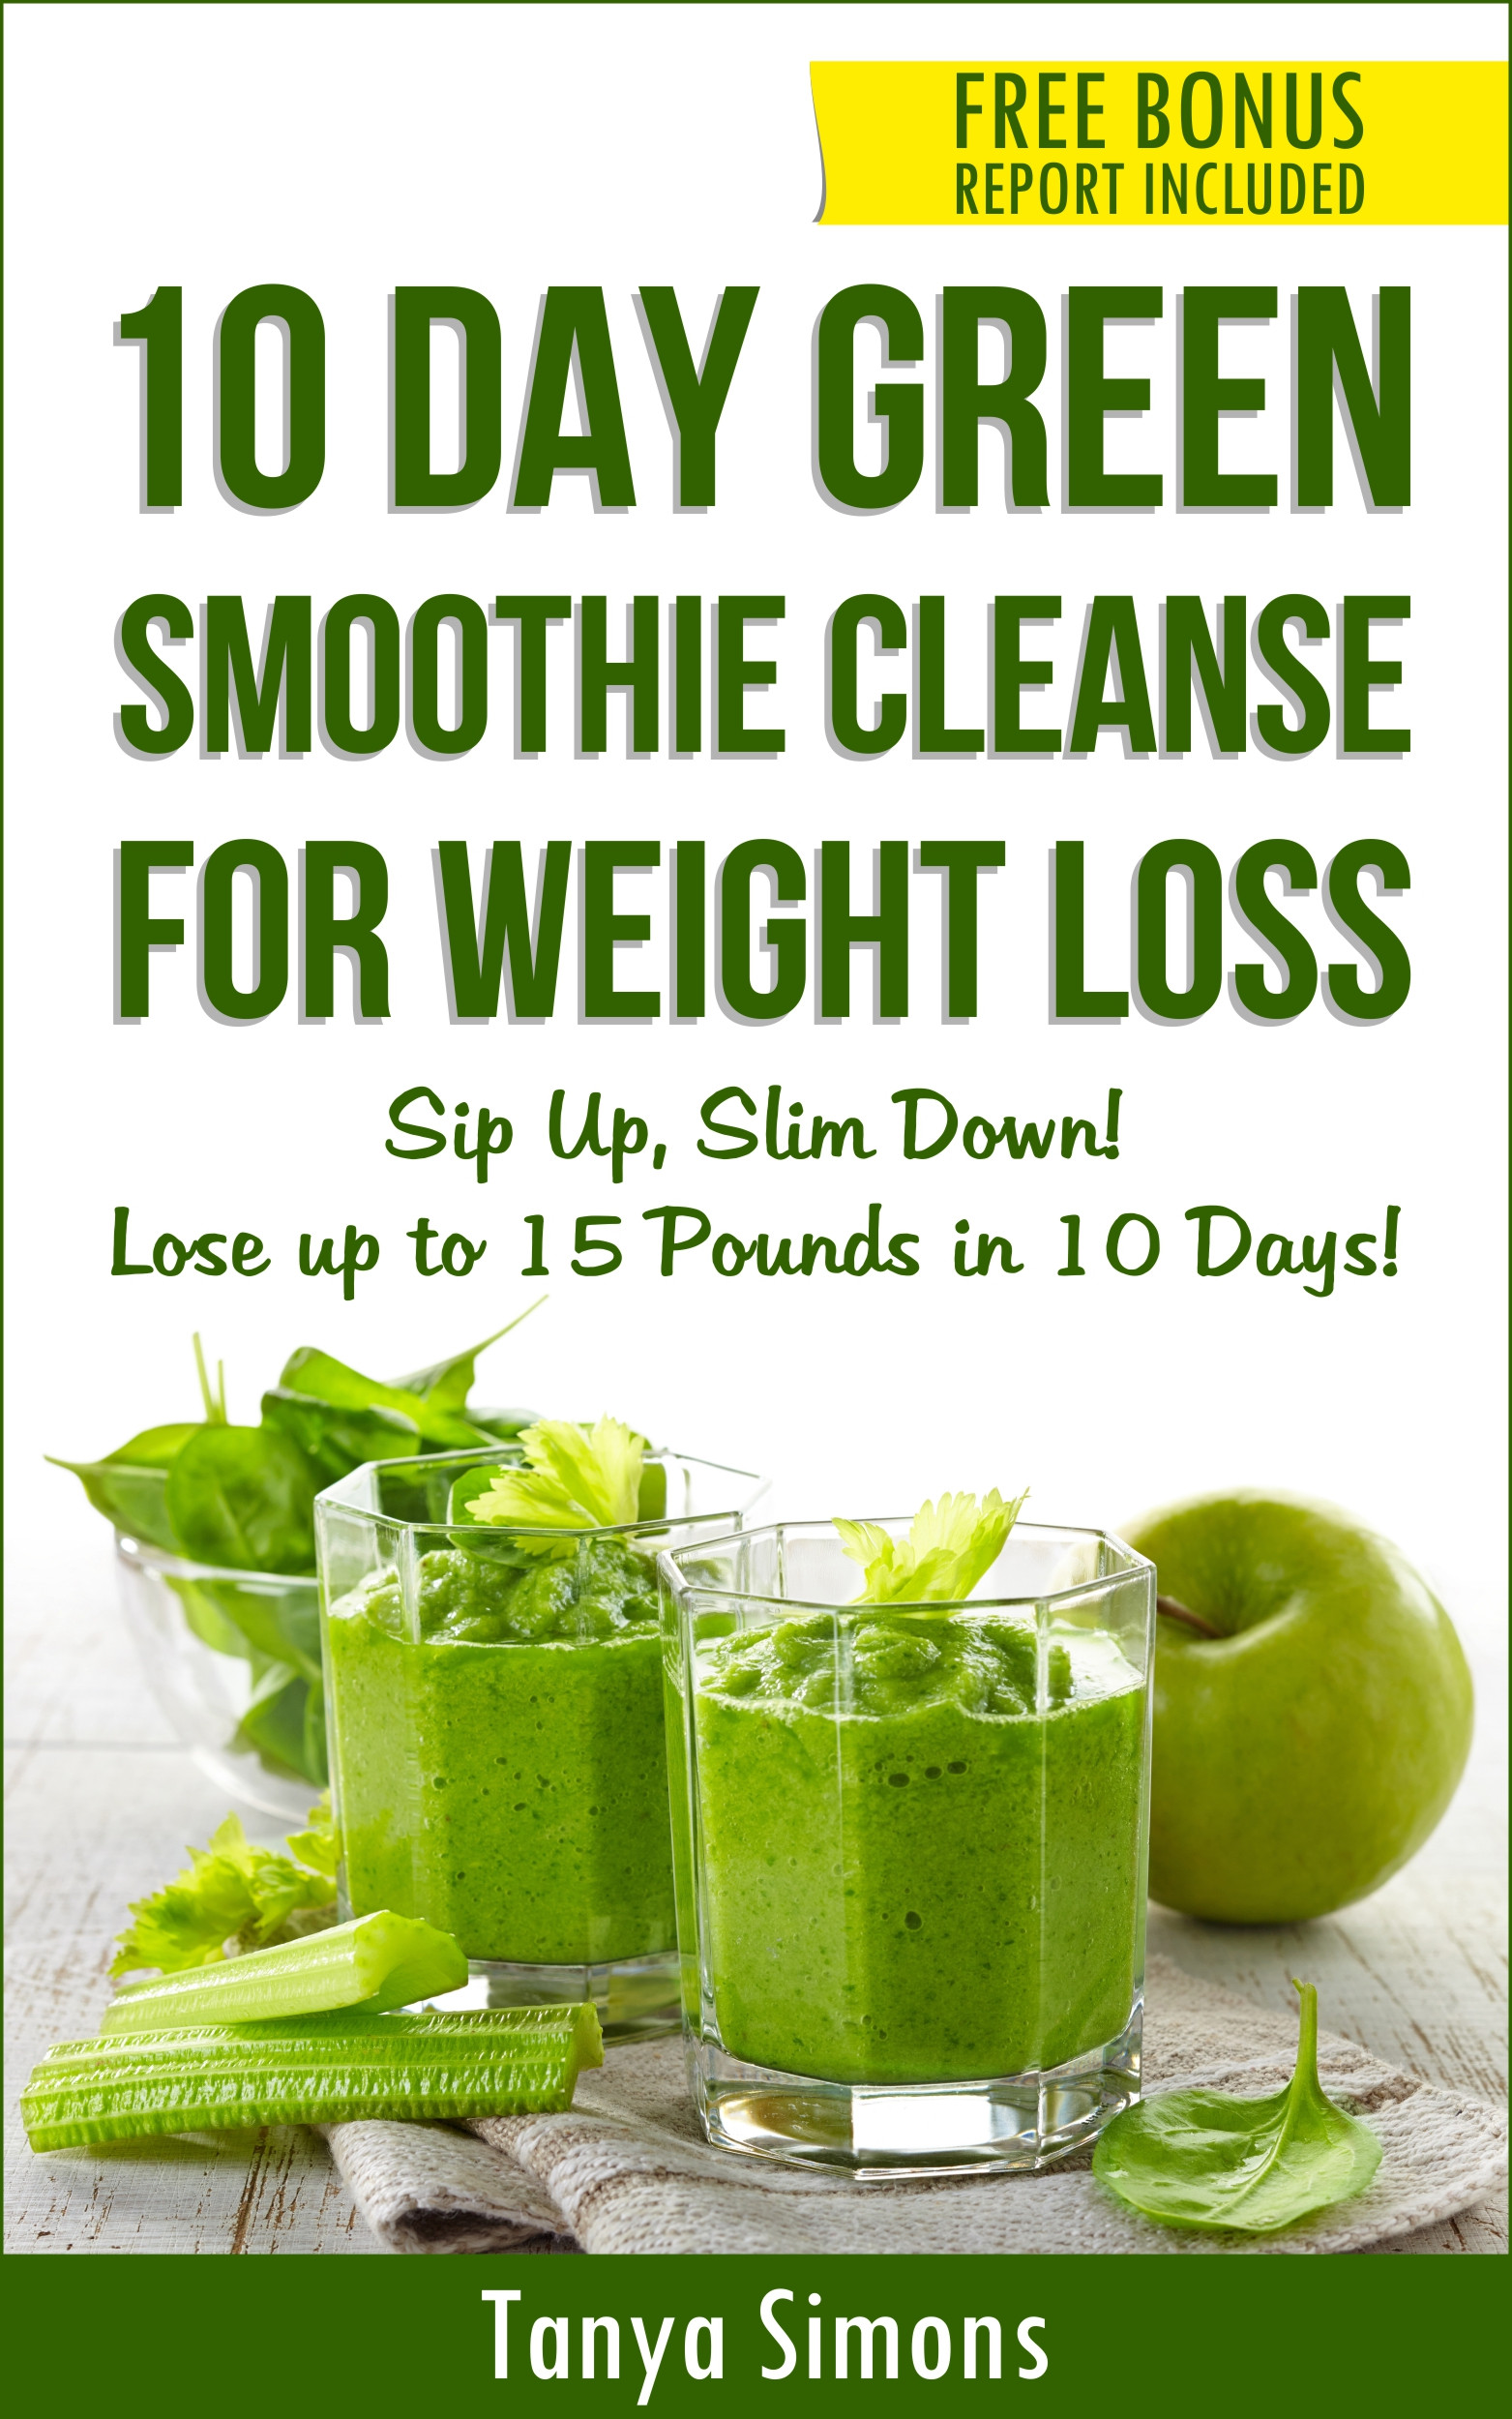 Diet Smoothie Recipes
 10 Day Green Smoothie Cleanse Lose 15lbs with 10 Day